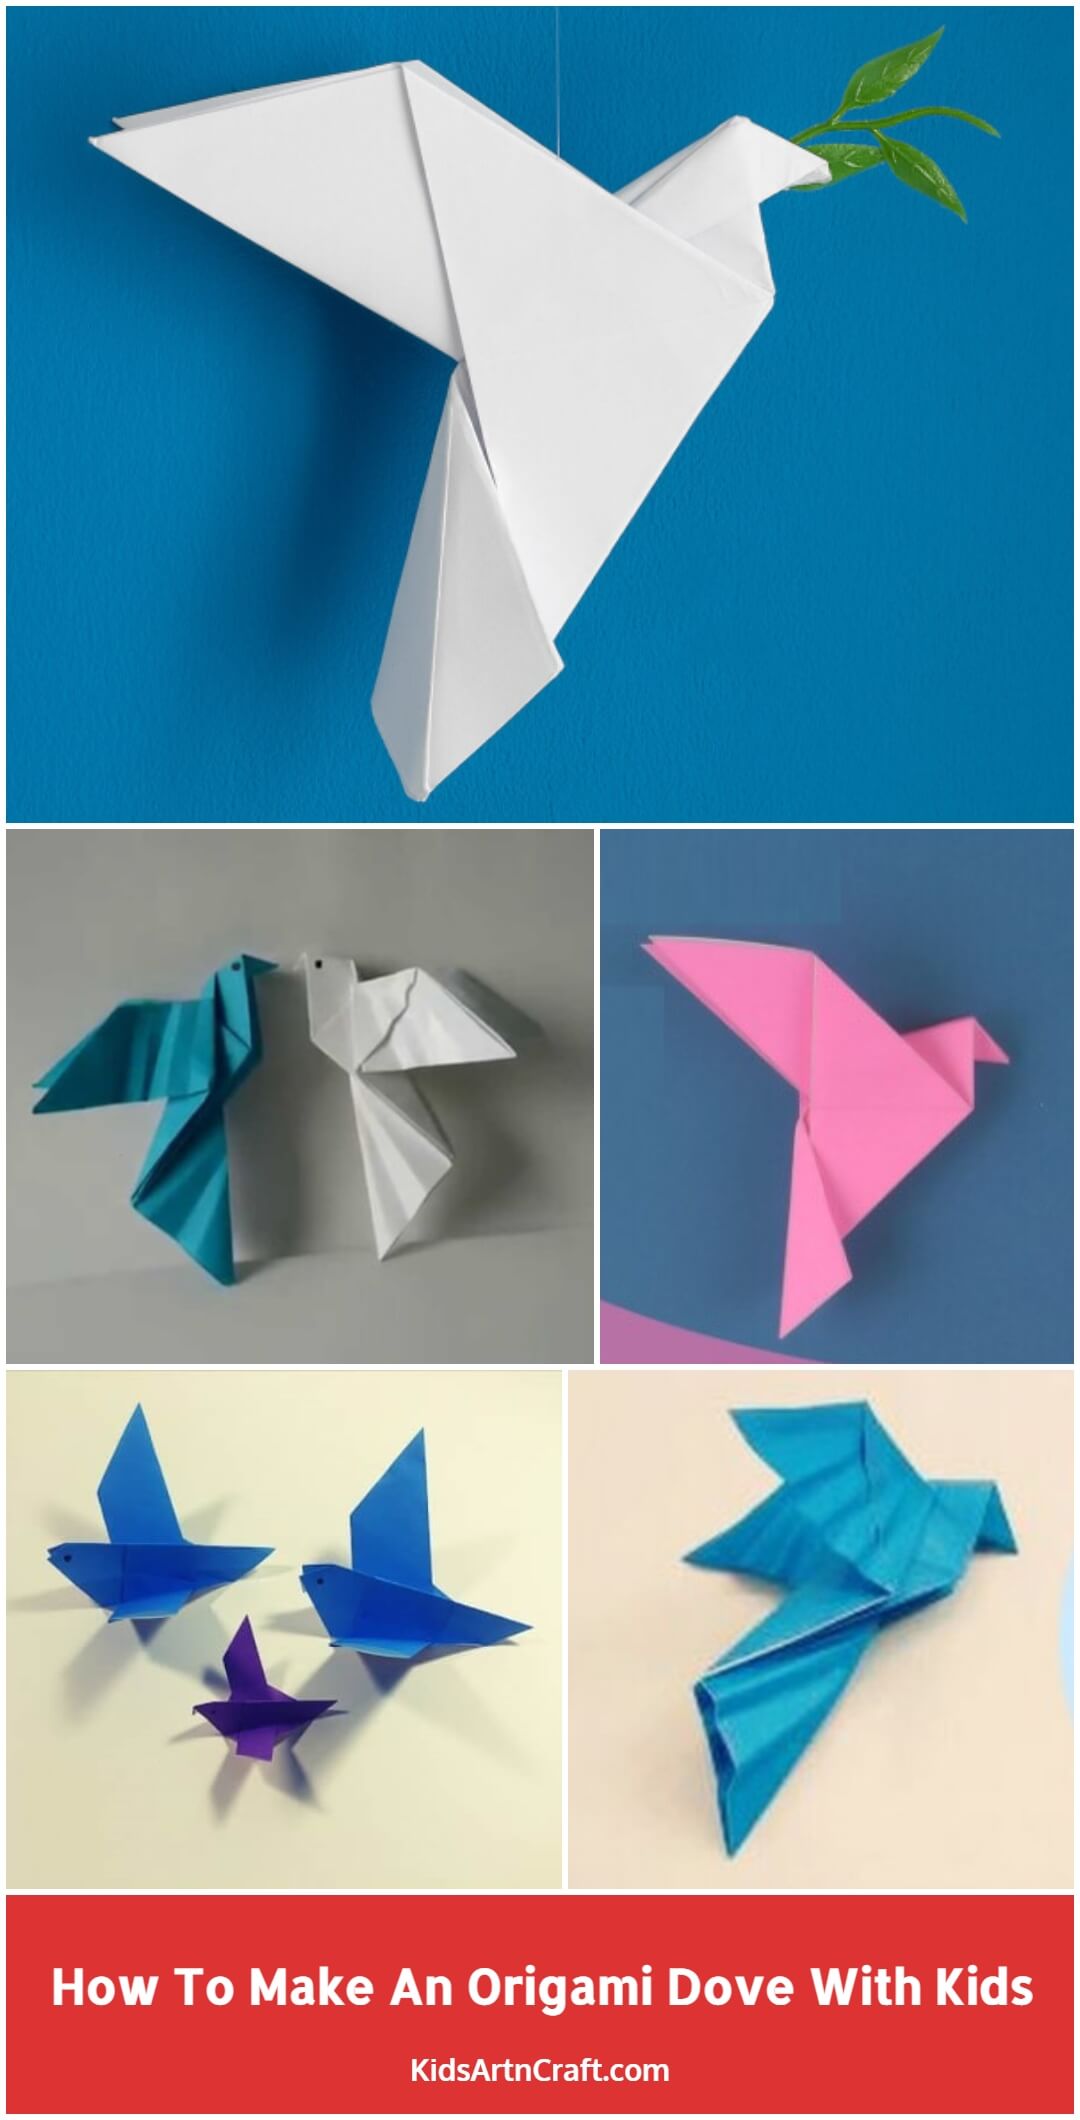 How To Make An Origami Dove With Kids